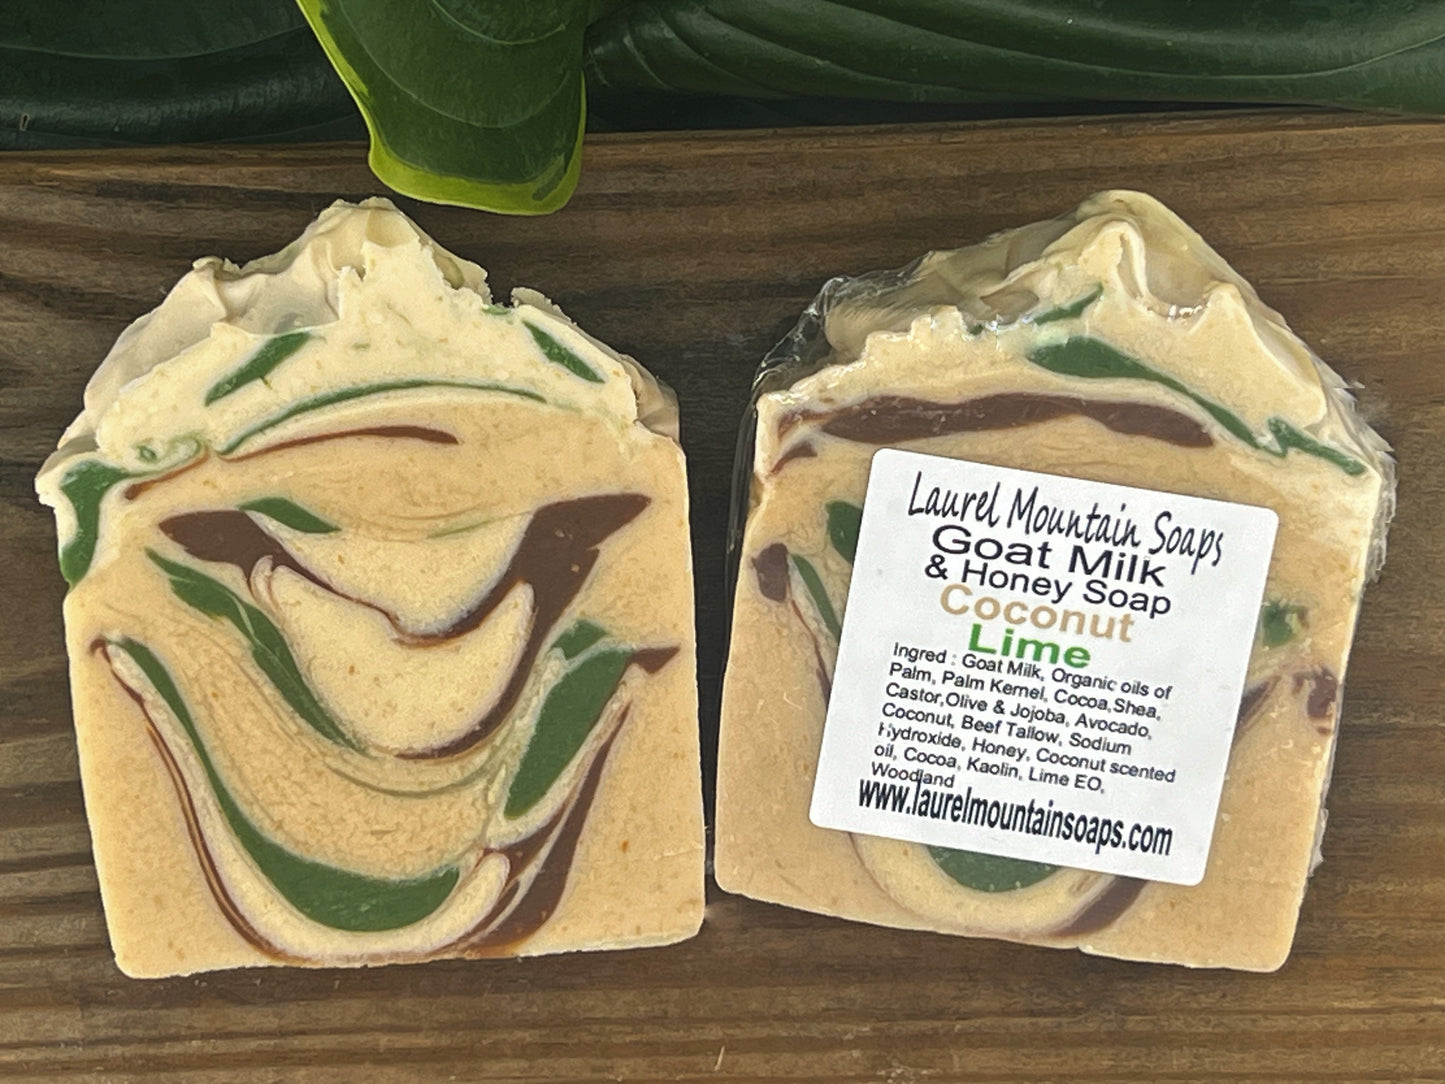 Coconut Lime Goat Milk and Honey Soap